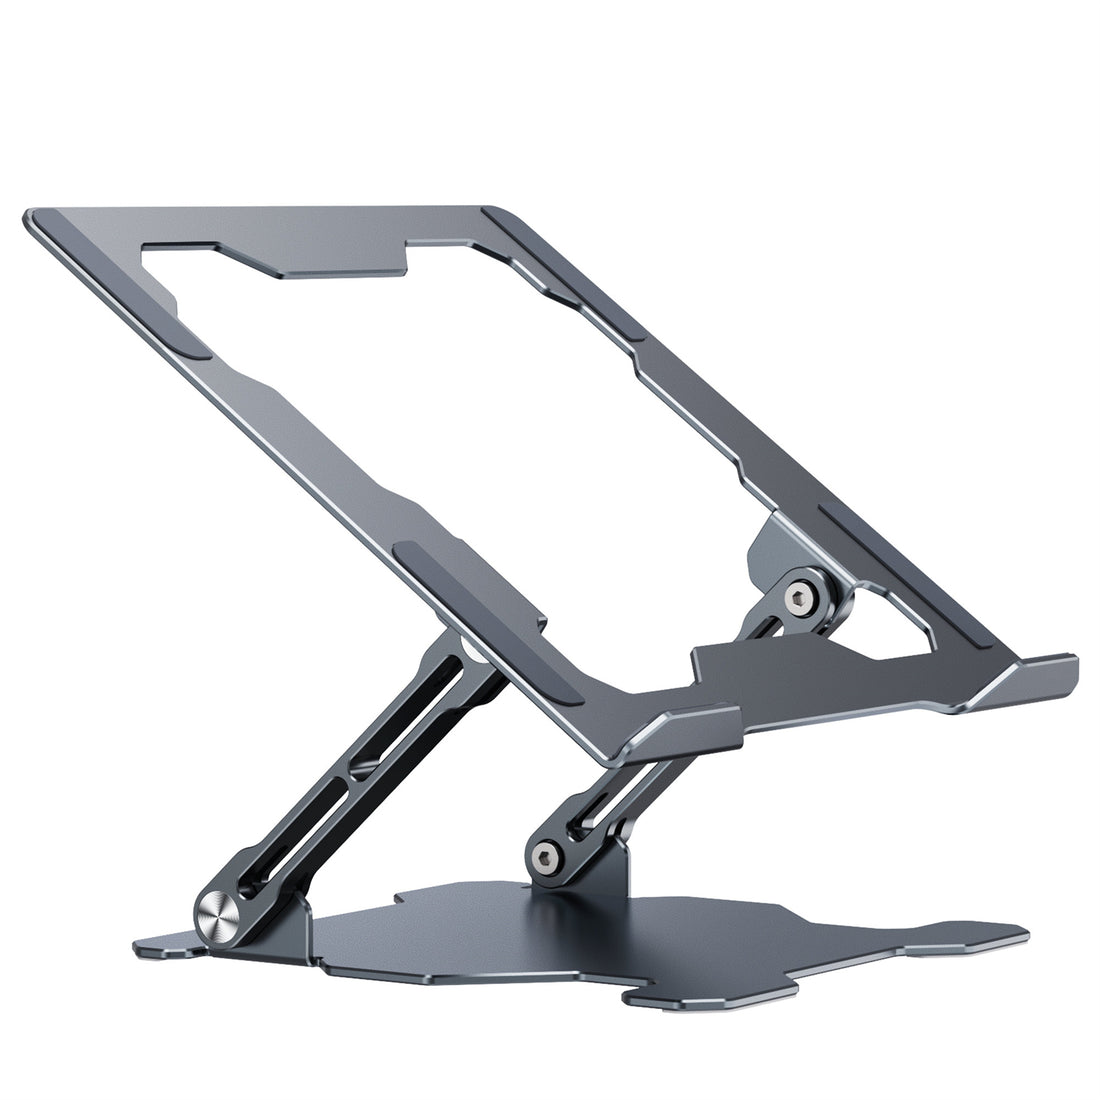 Do Gaming Laptops Need Stands?